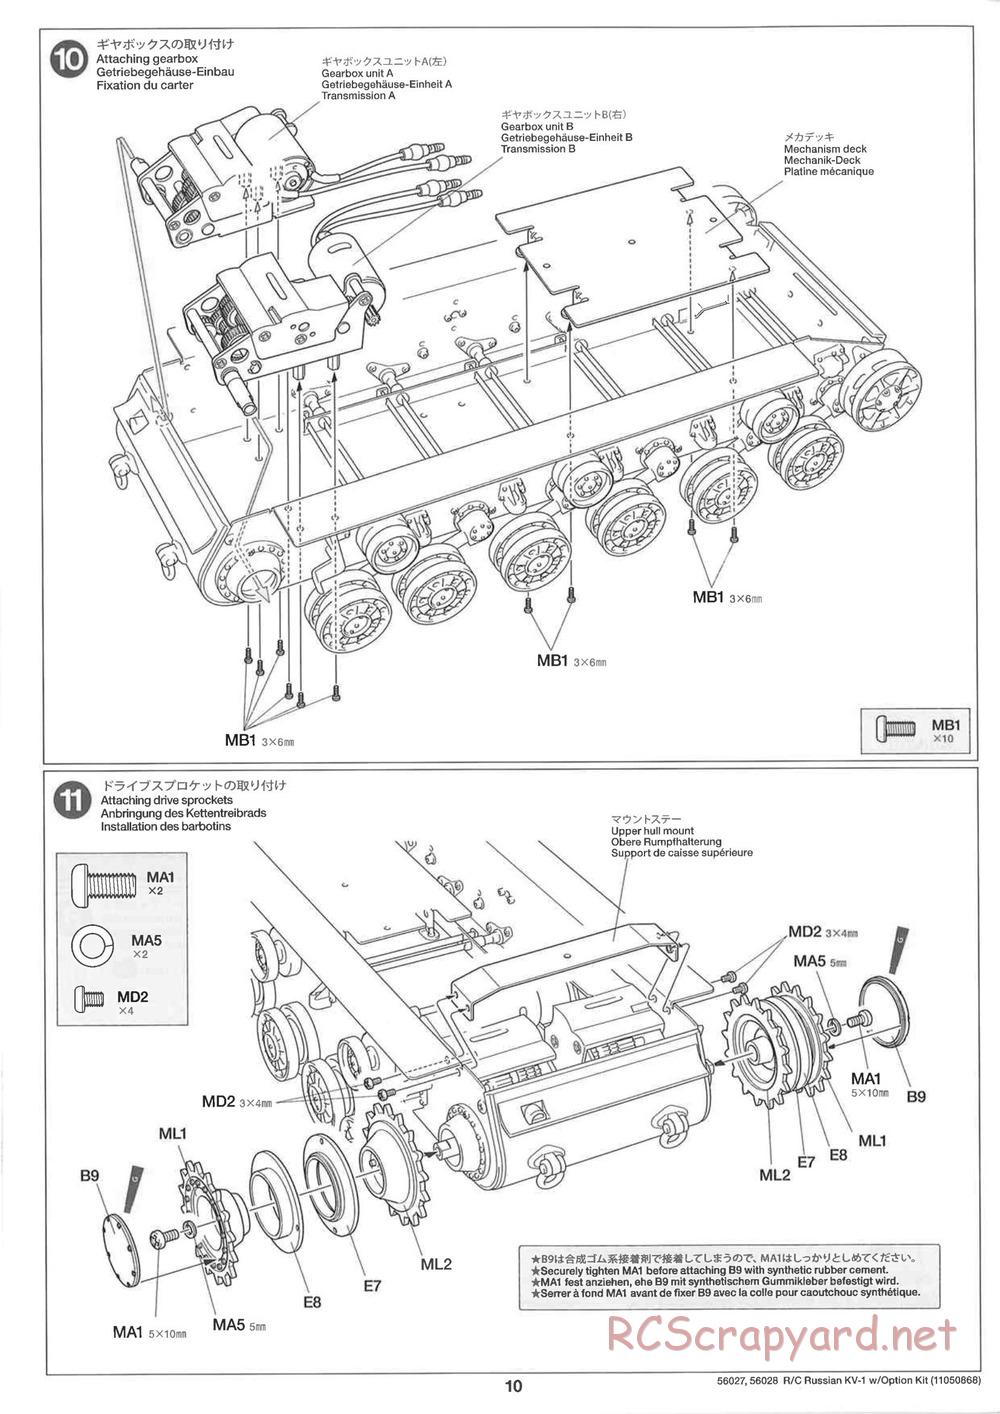 Tamiya - Russian Heavy Tank KV-1 - 1/16 Scale Chassis - Manual - Page 10